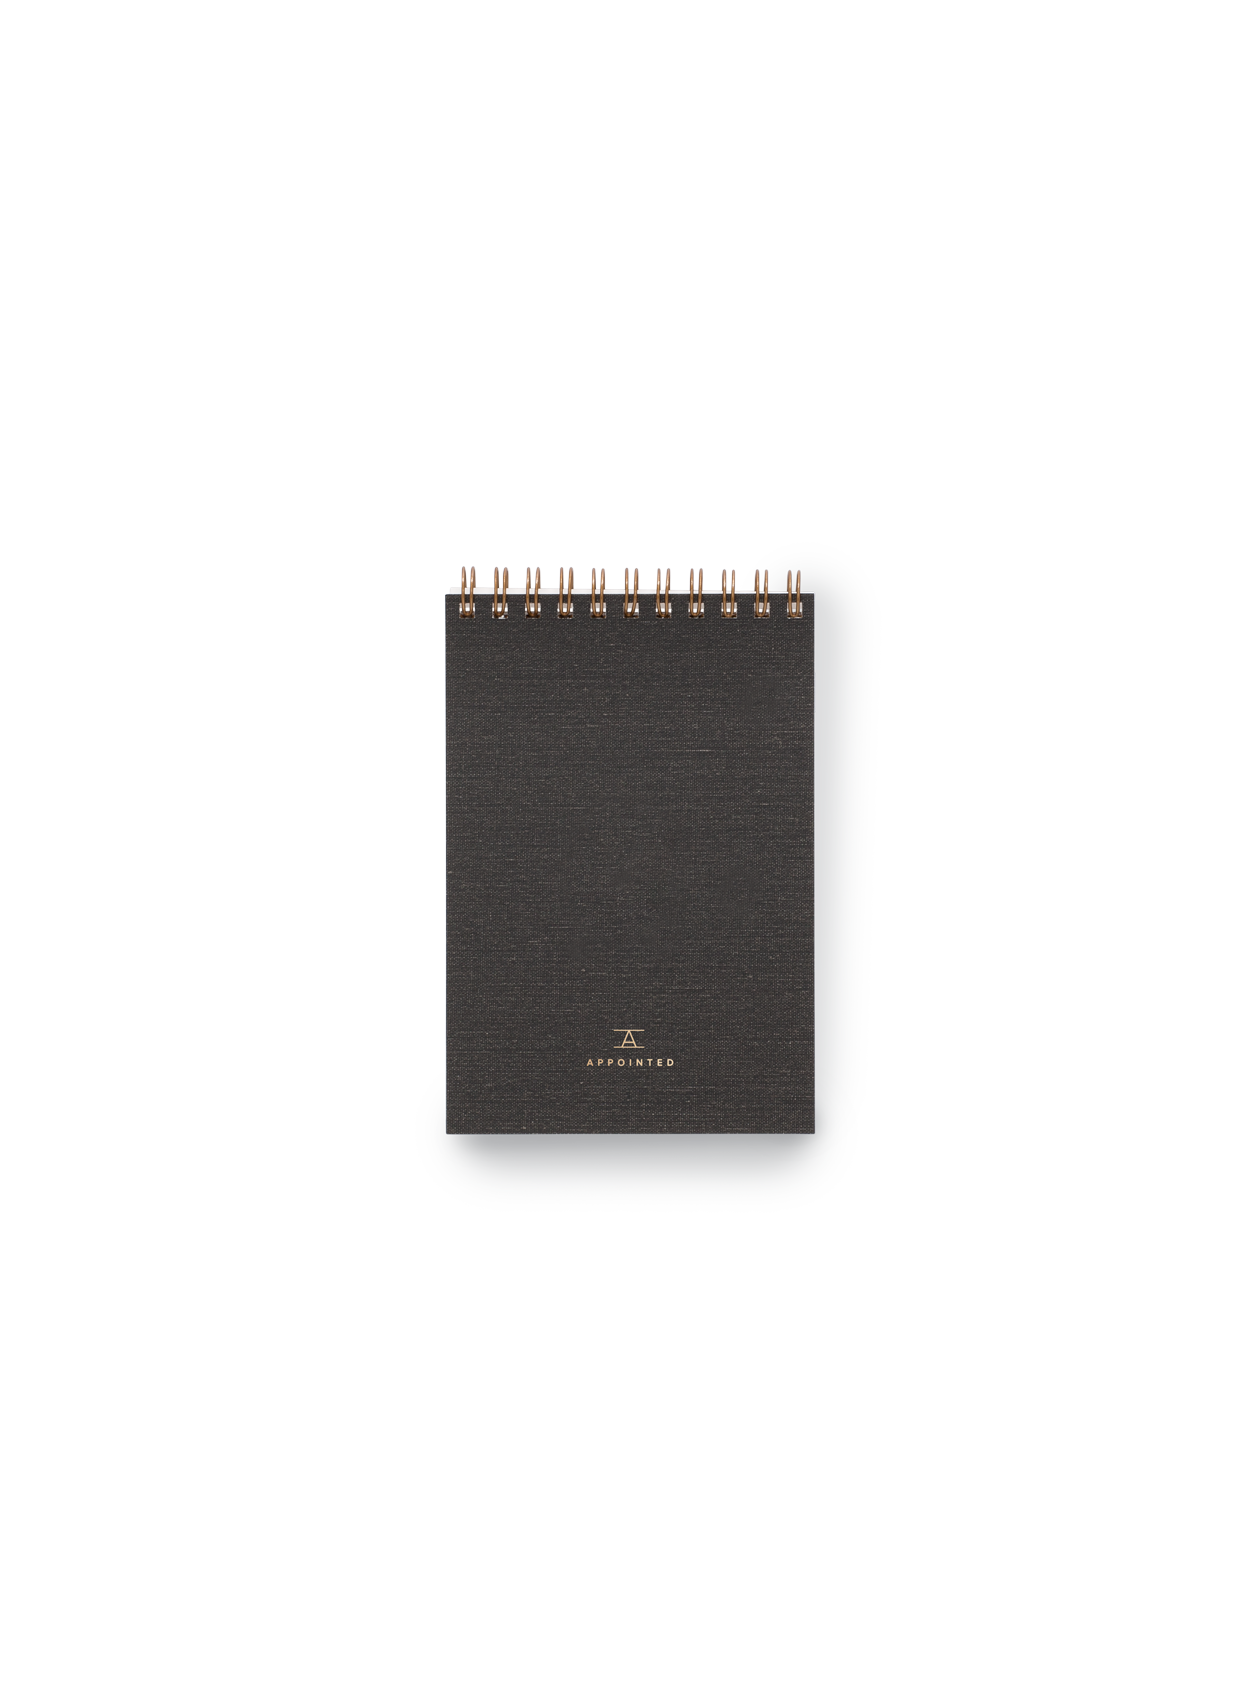 Appointed Pocket Notepad in Charcoal Gray bookcloth with brass wire-o binding front view || Charcoal Gray